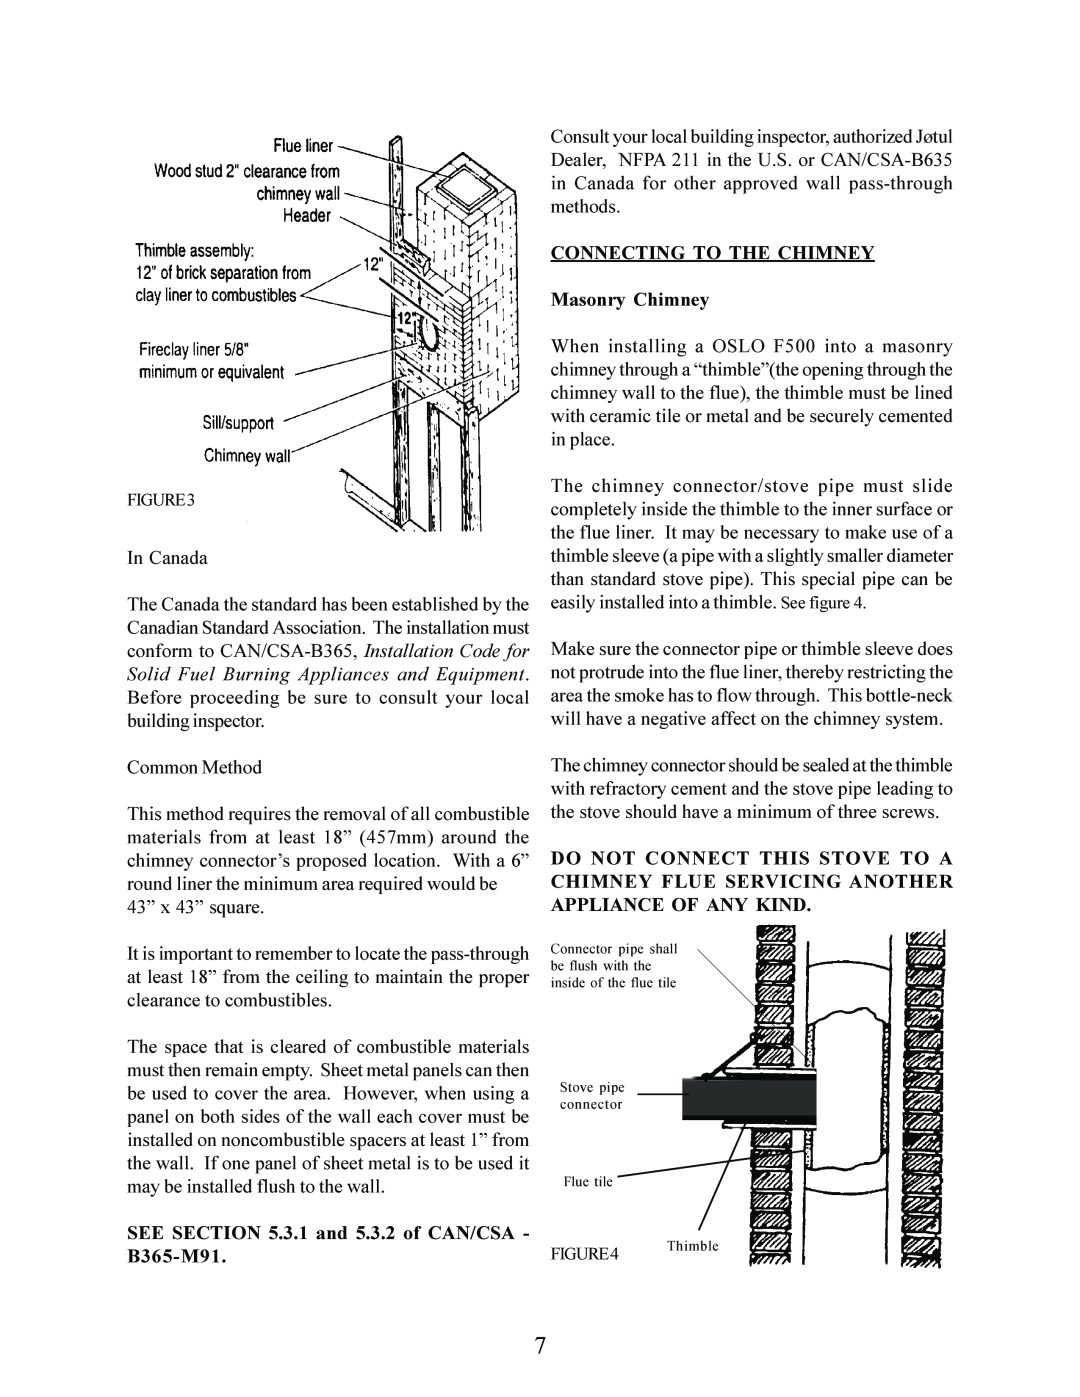 Jotul F 500 operating instructions SEE .3.1 and 5.3.2 of CAN/CSA - B365-M91, CONNECTING TO THE CHIMNEY Masonry Chimney 